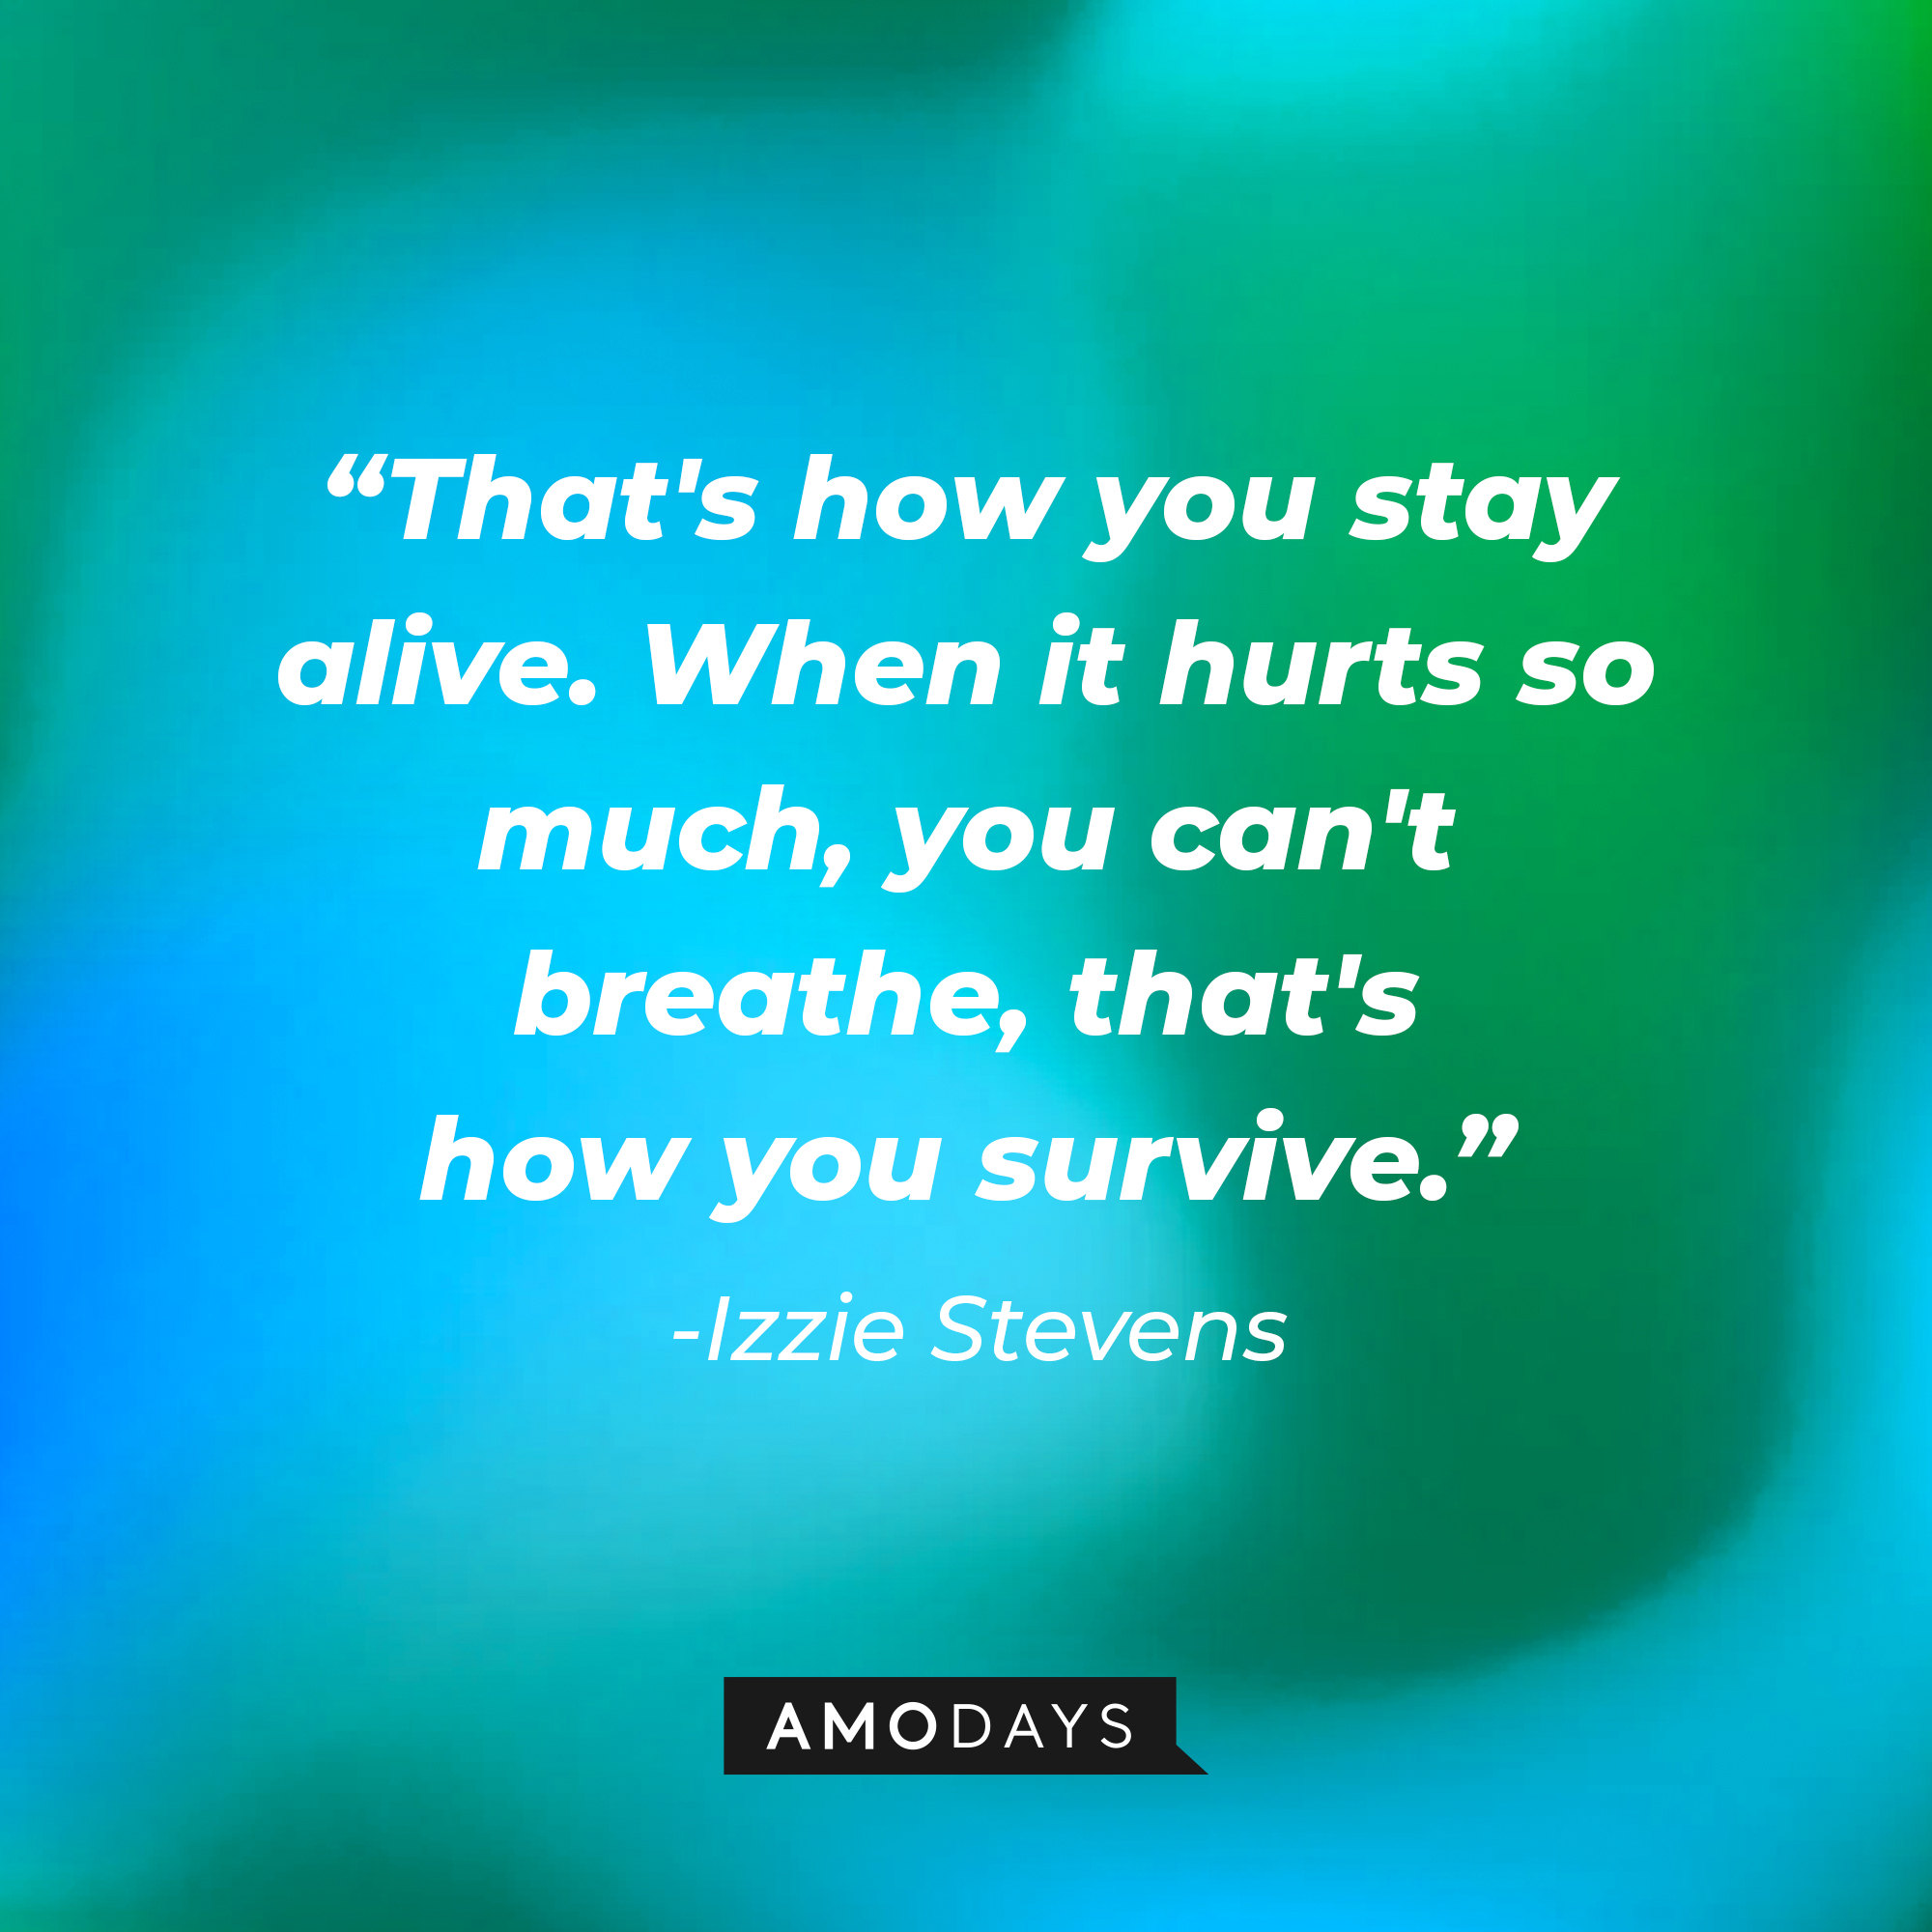 Izzy Stevens' quote: “That's how you stay alive. When it hurts so much, you can't breathe, that's how you survive.”  | Image: Amodays